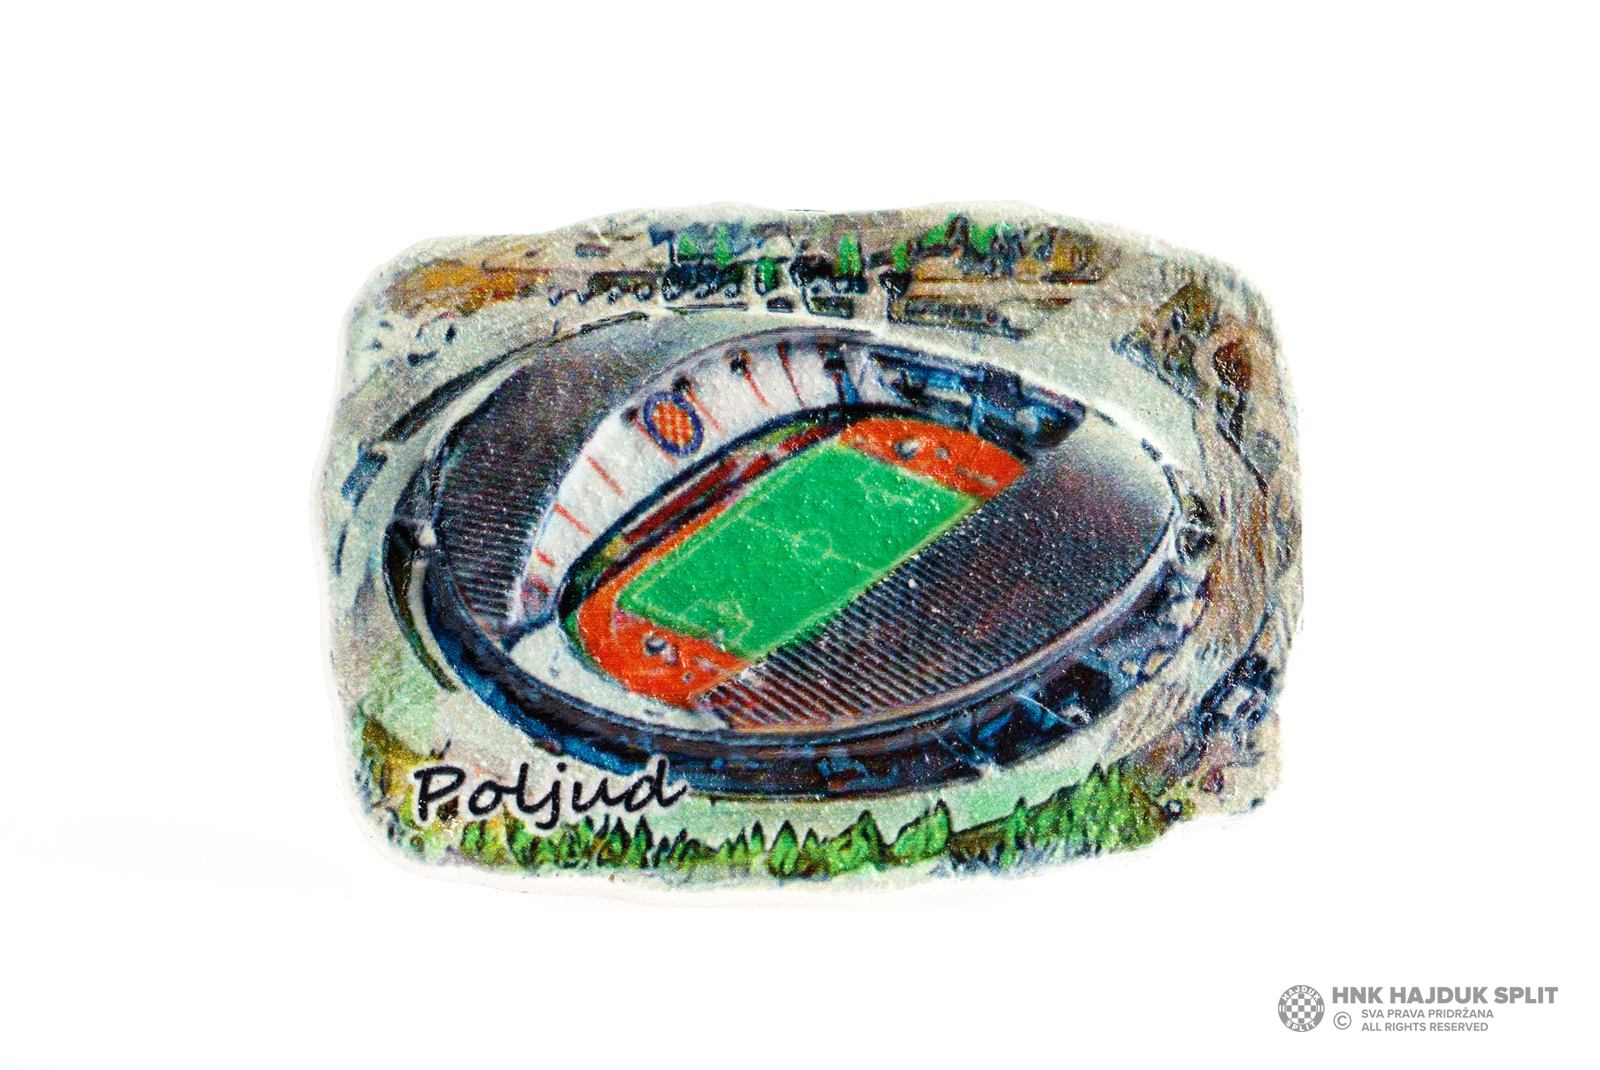 FootballStadiums360 - Hajduk Split - Stadion Poljud. It's been a while, but  by popular demand, posters and prints are now available! Use the code  HAJDUK360 for 10% off ALL prints. 👇View the